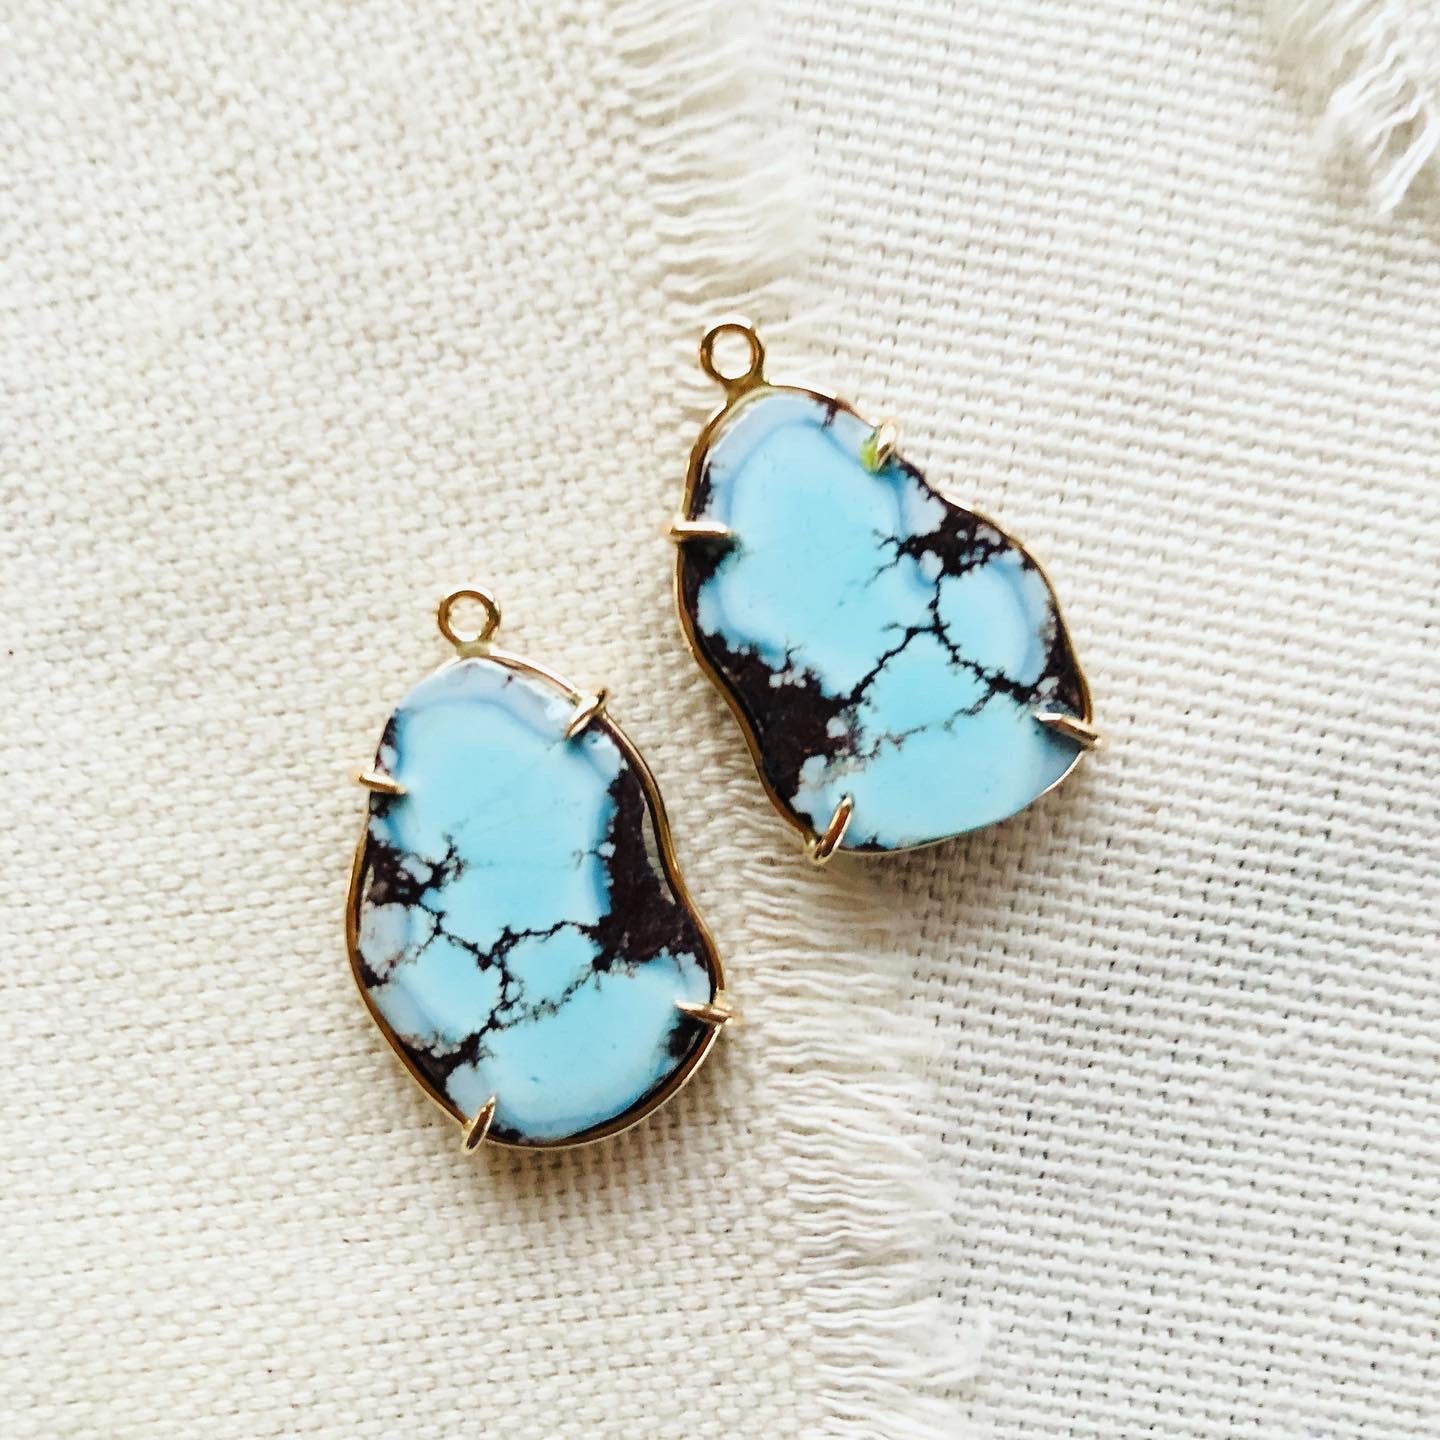 Let these effortlessly chic Kazakhstan turquoise earrings dress up your beach holiday. Kazakhstan turquoise is also known as Golden Hills turquoise or Lavender turquoise.